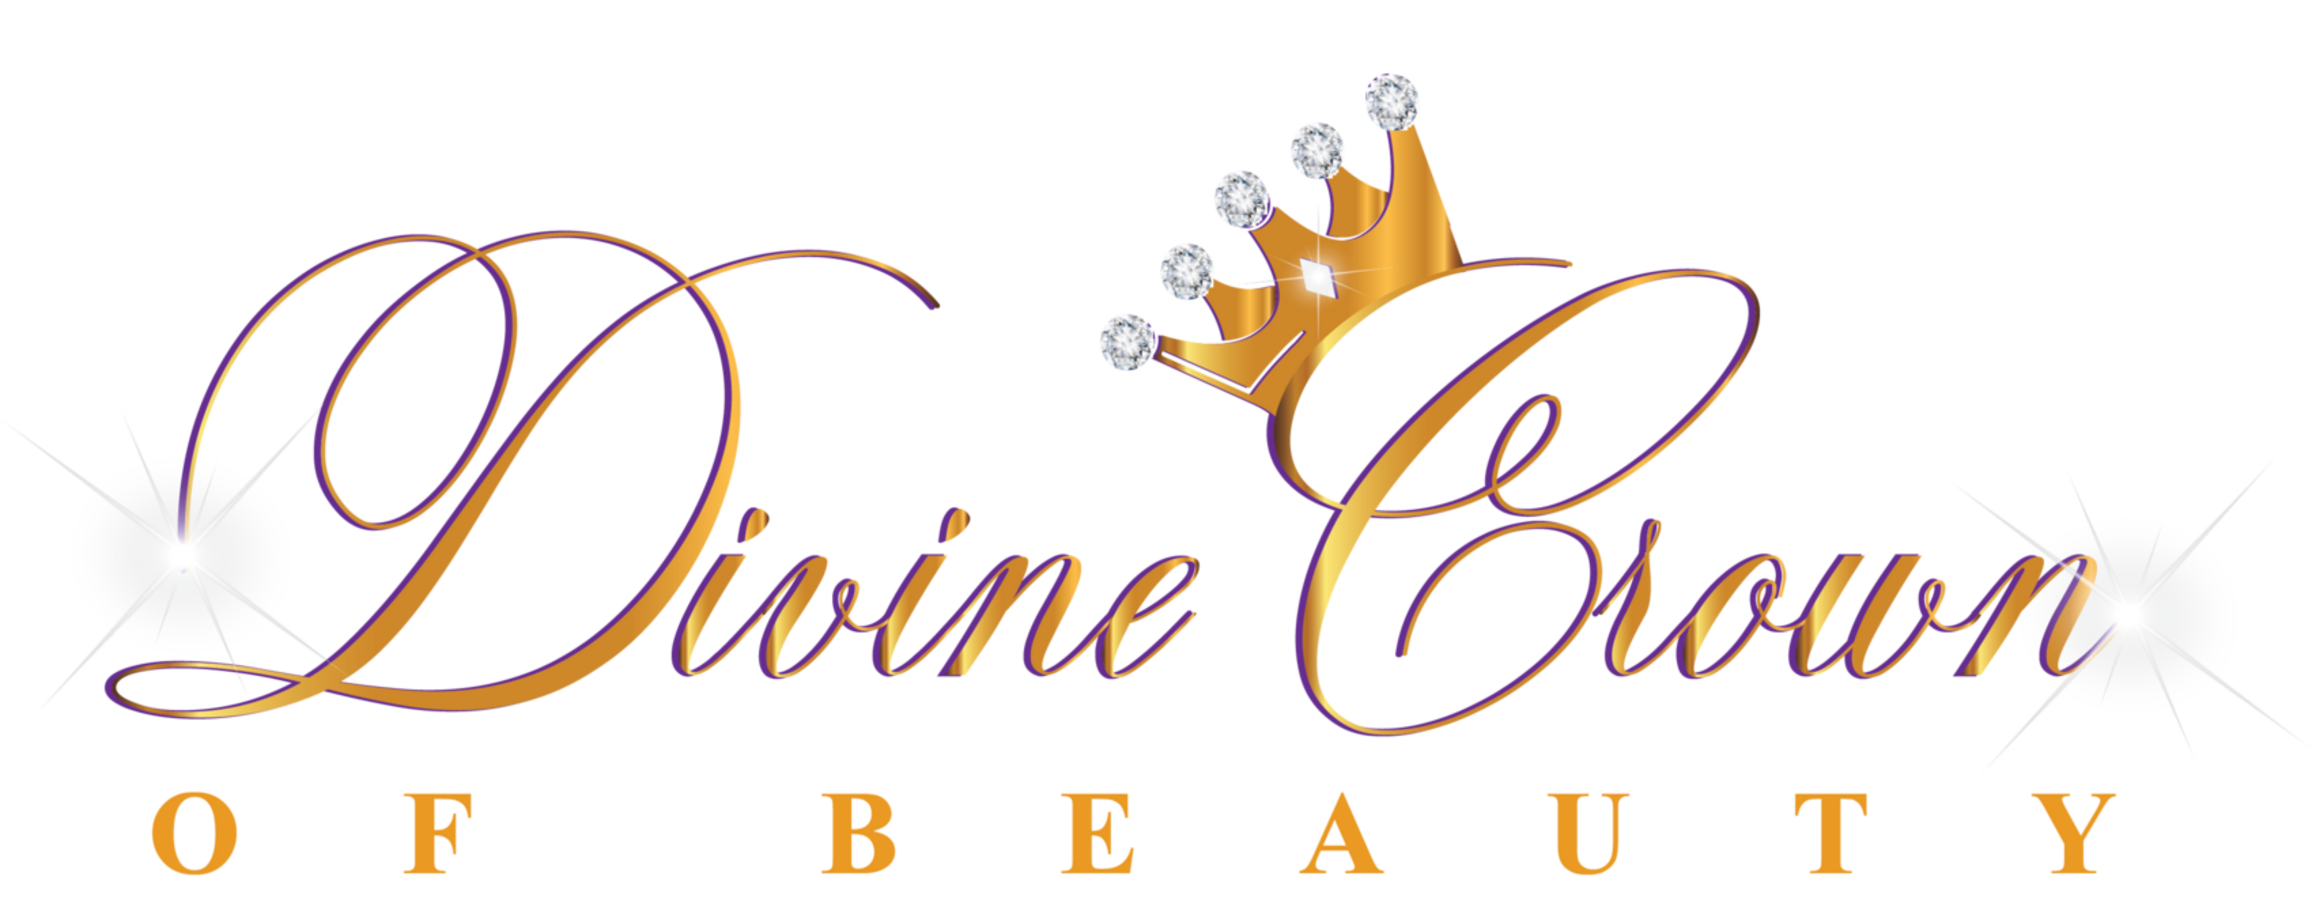 Divine Crown of Beauty